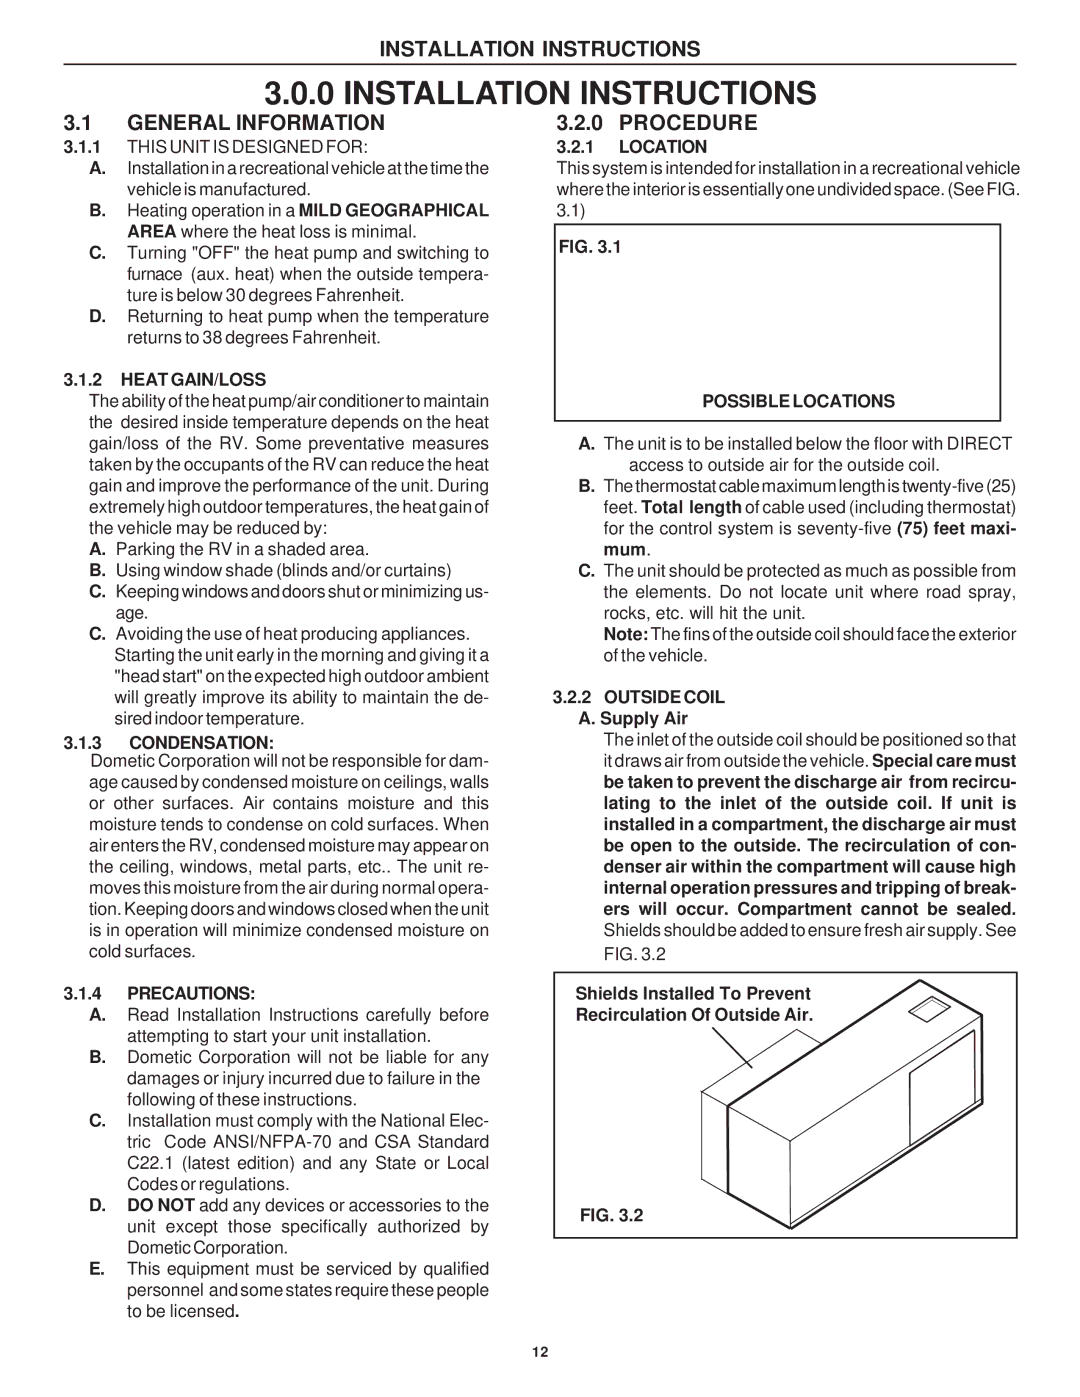 Dometic 39726.506, 39626.501, 39726.501, 39626.506 installation instructions General Information 